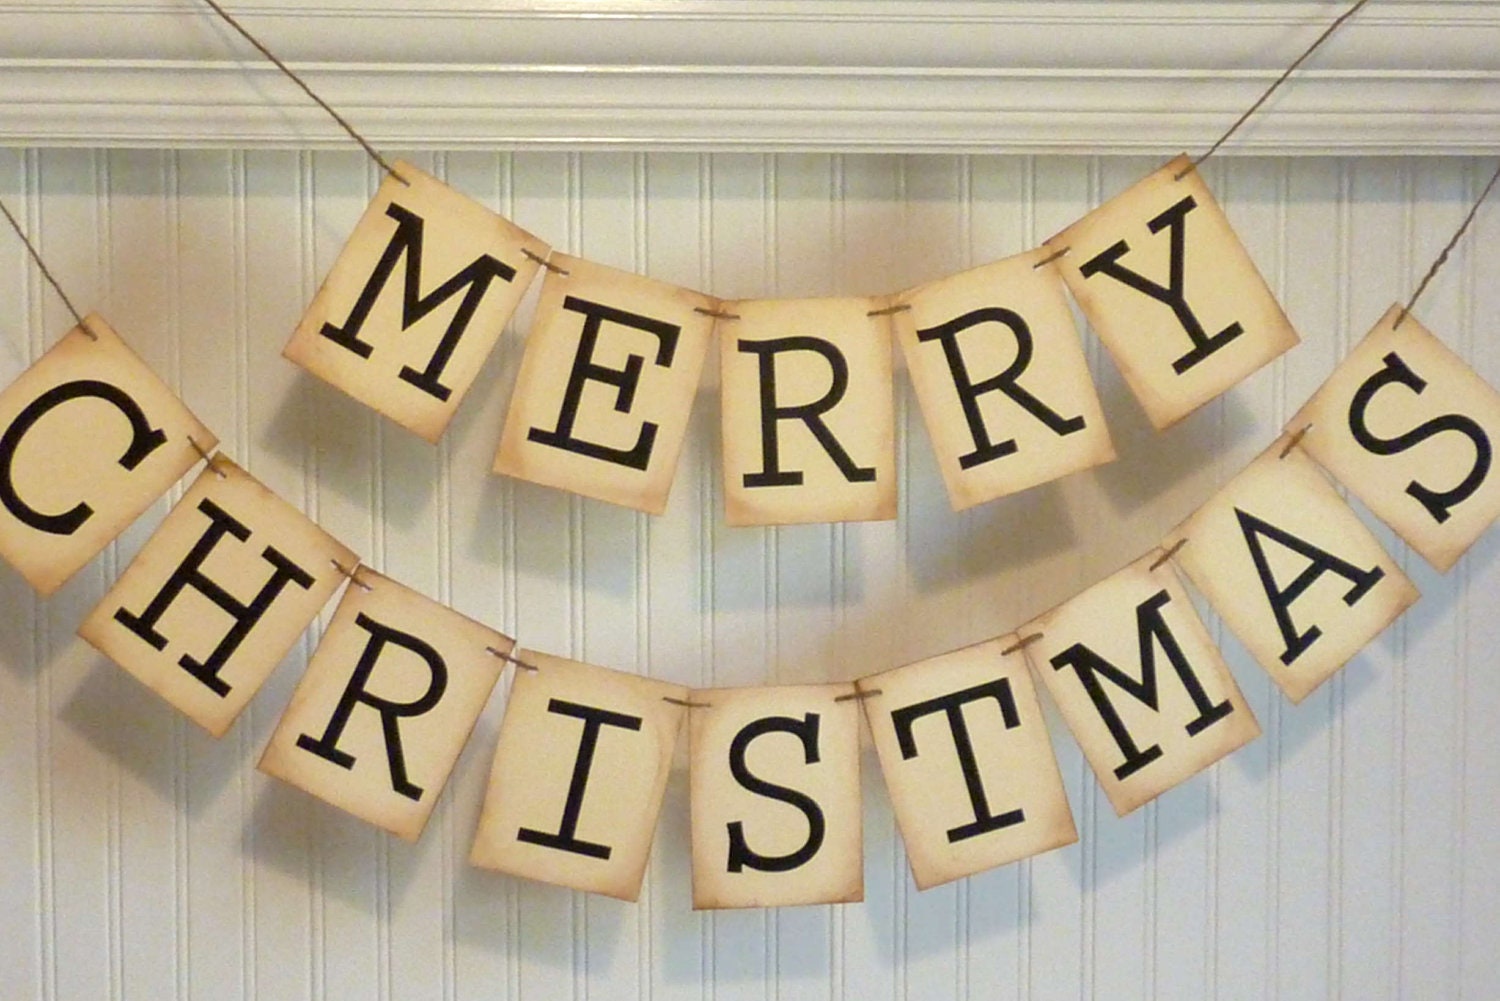 Items similar to Merry Christmas Banner, Rustic Holiday Banner on Etsy